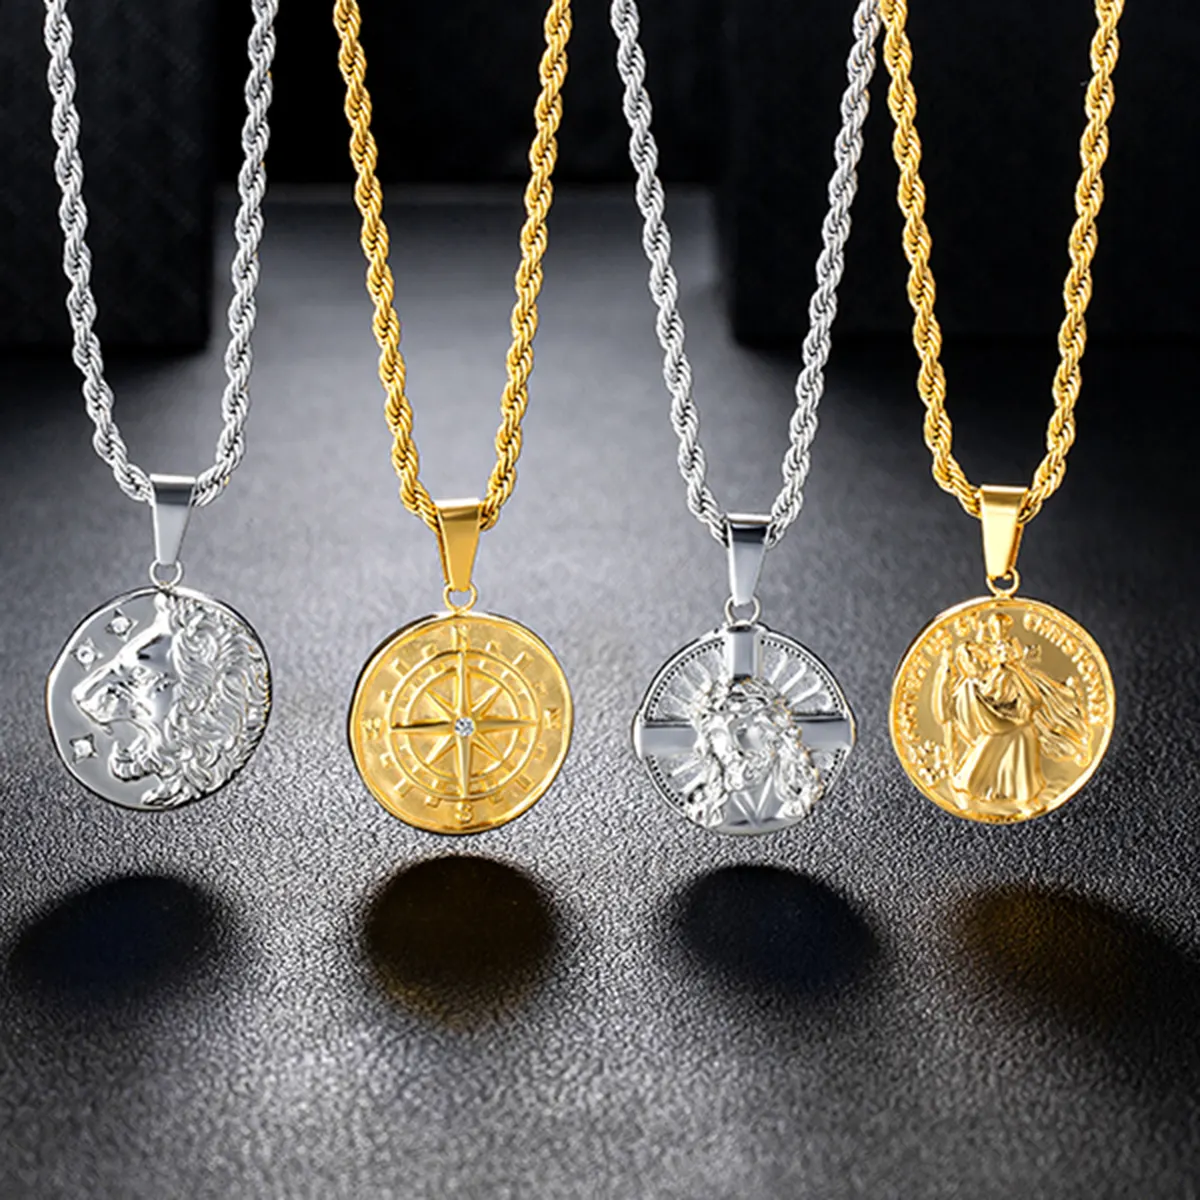 Customized Jewelry Loin Compass CHRISTOPHER Jesus Cross 18K Gold Plated Stainless Steel Pendant Gold Coin Necklace for Men Women